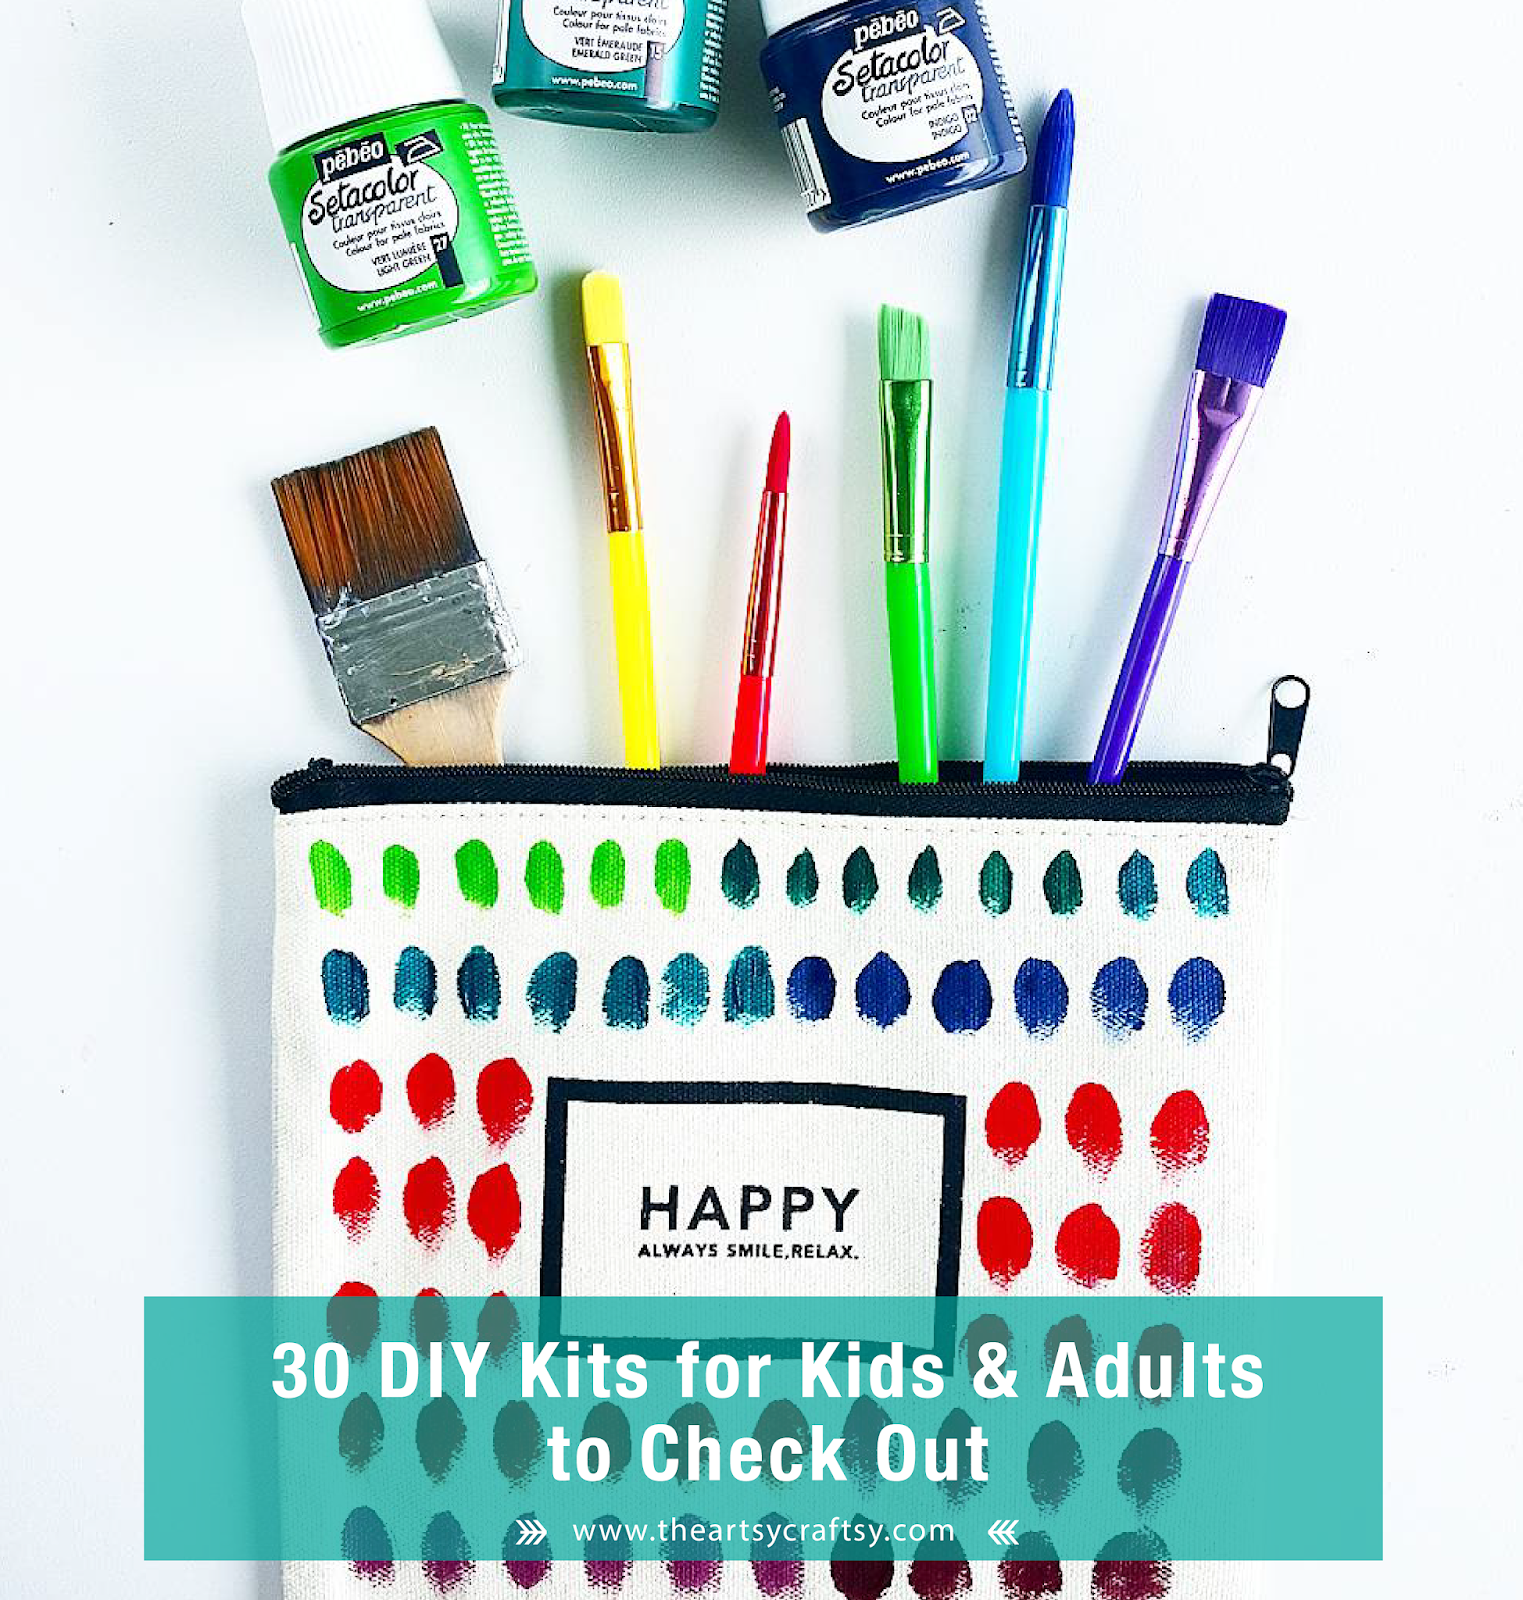 WOW! 30 DIY Kits for Adults and Kids to Check Out